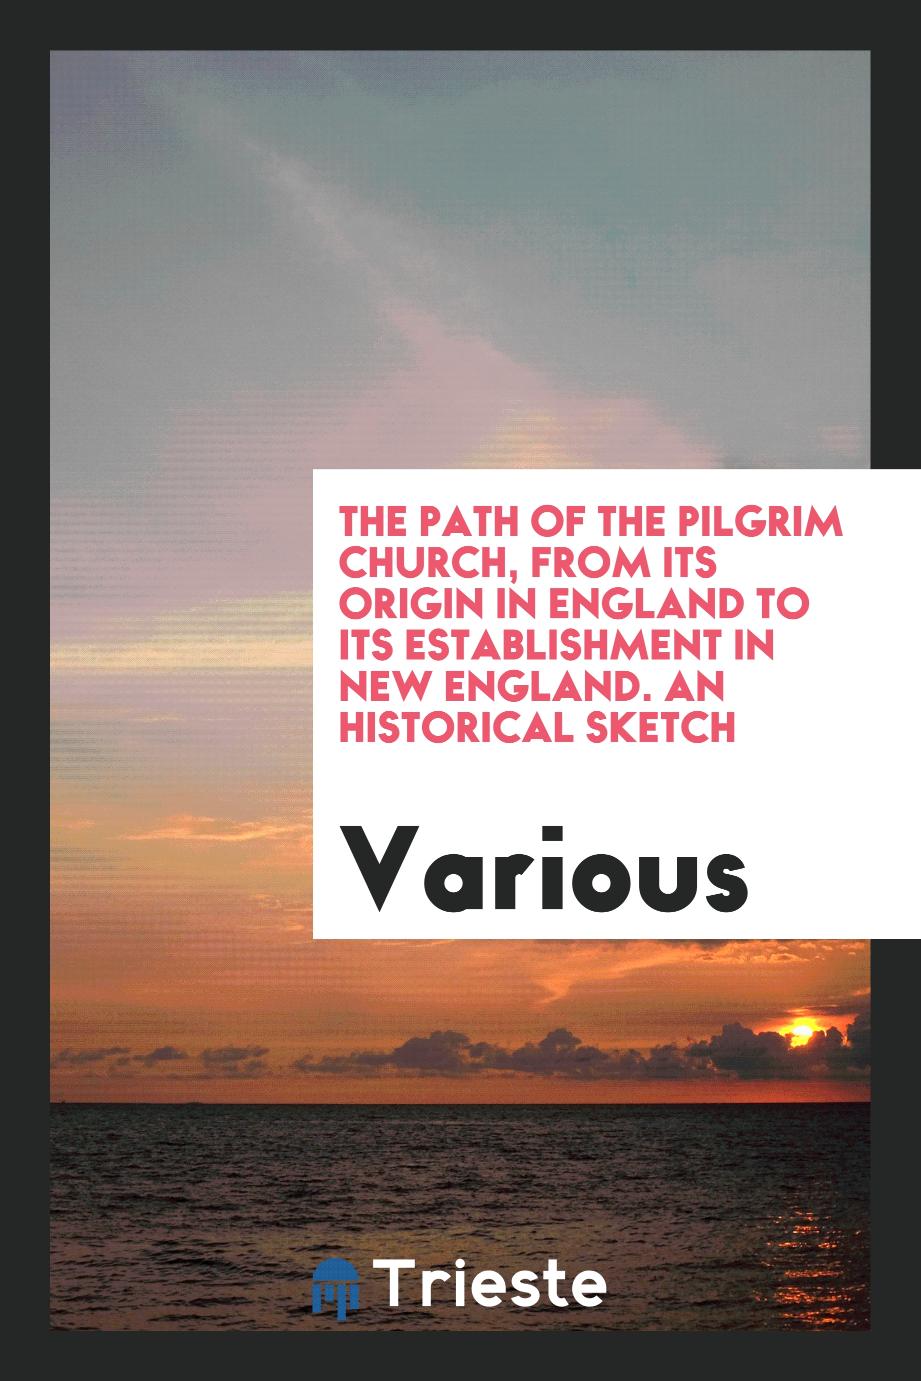 The path of the Pilgrim church, from its origin in England to its establishment in New England. An historical sketch